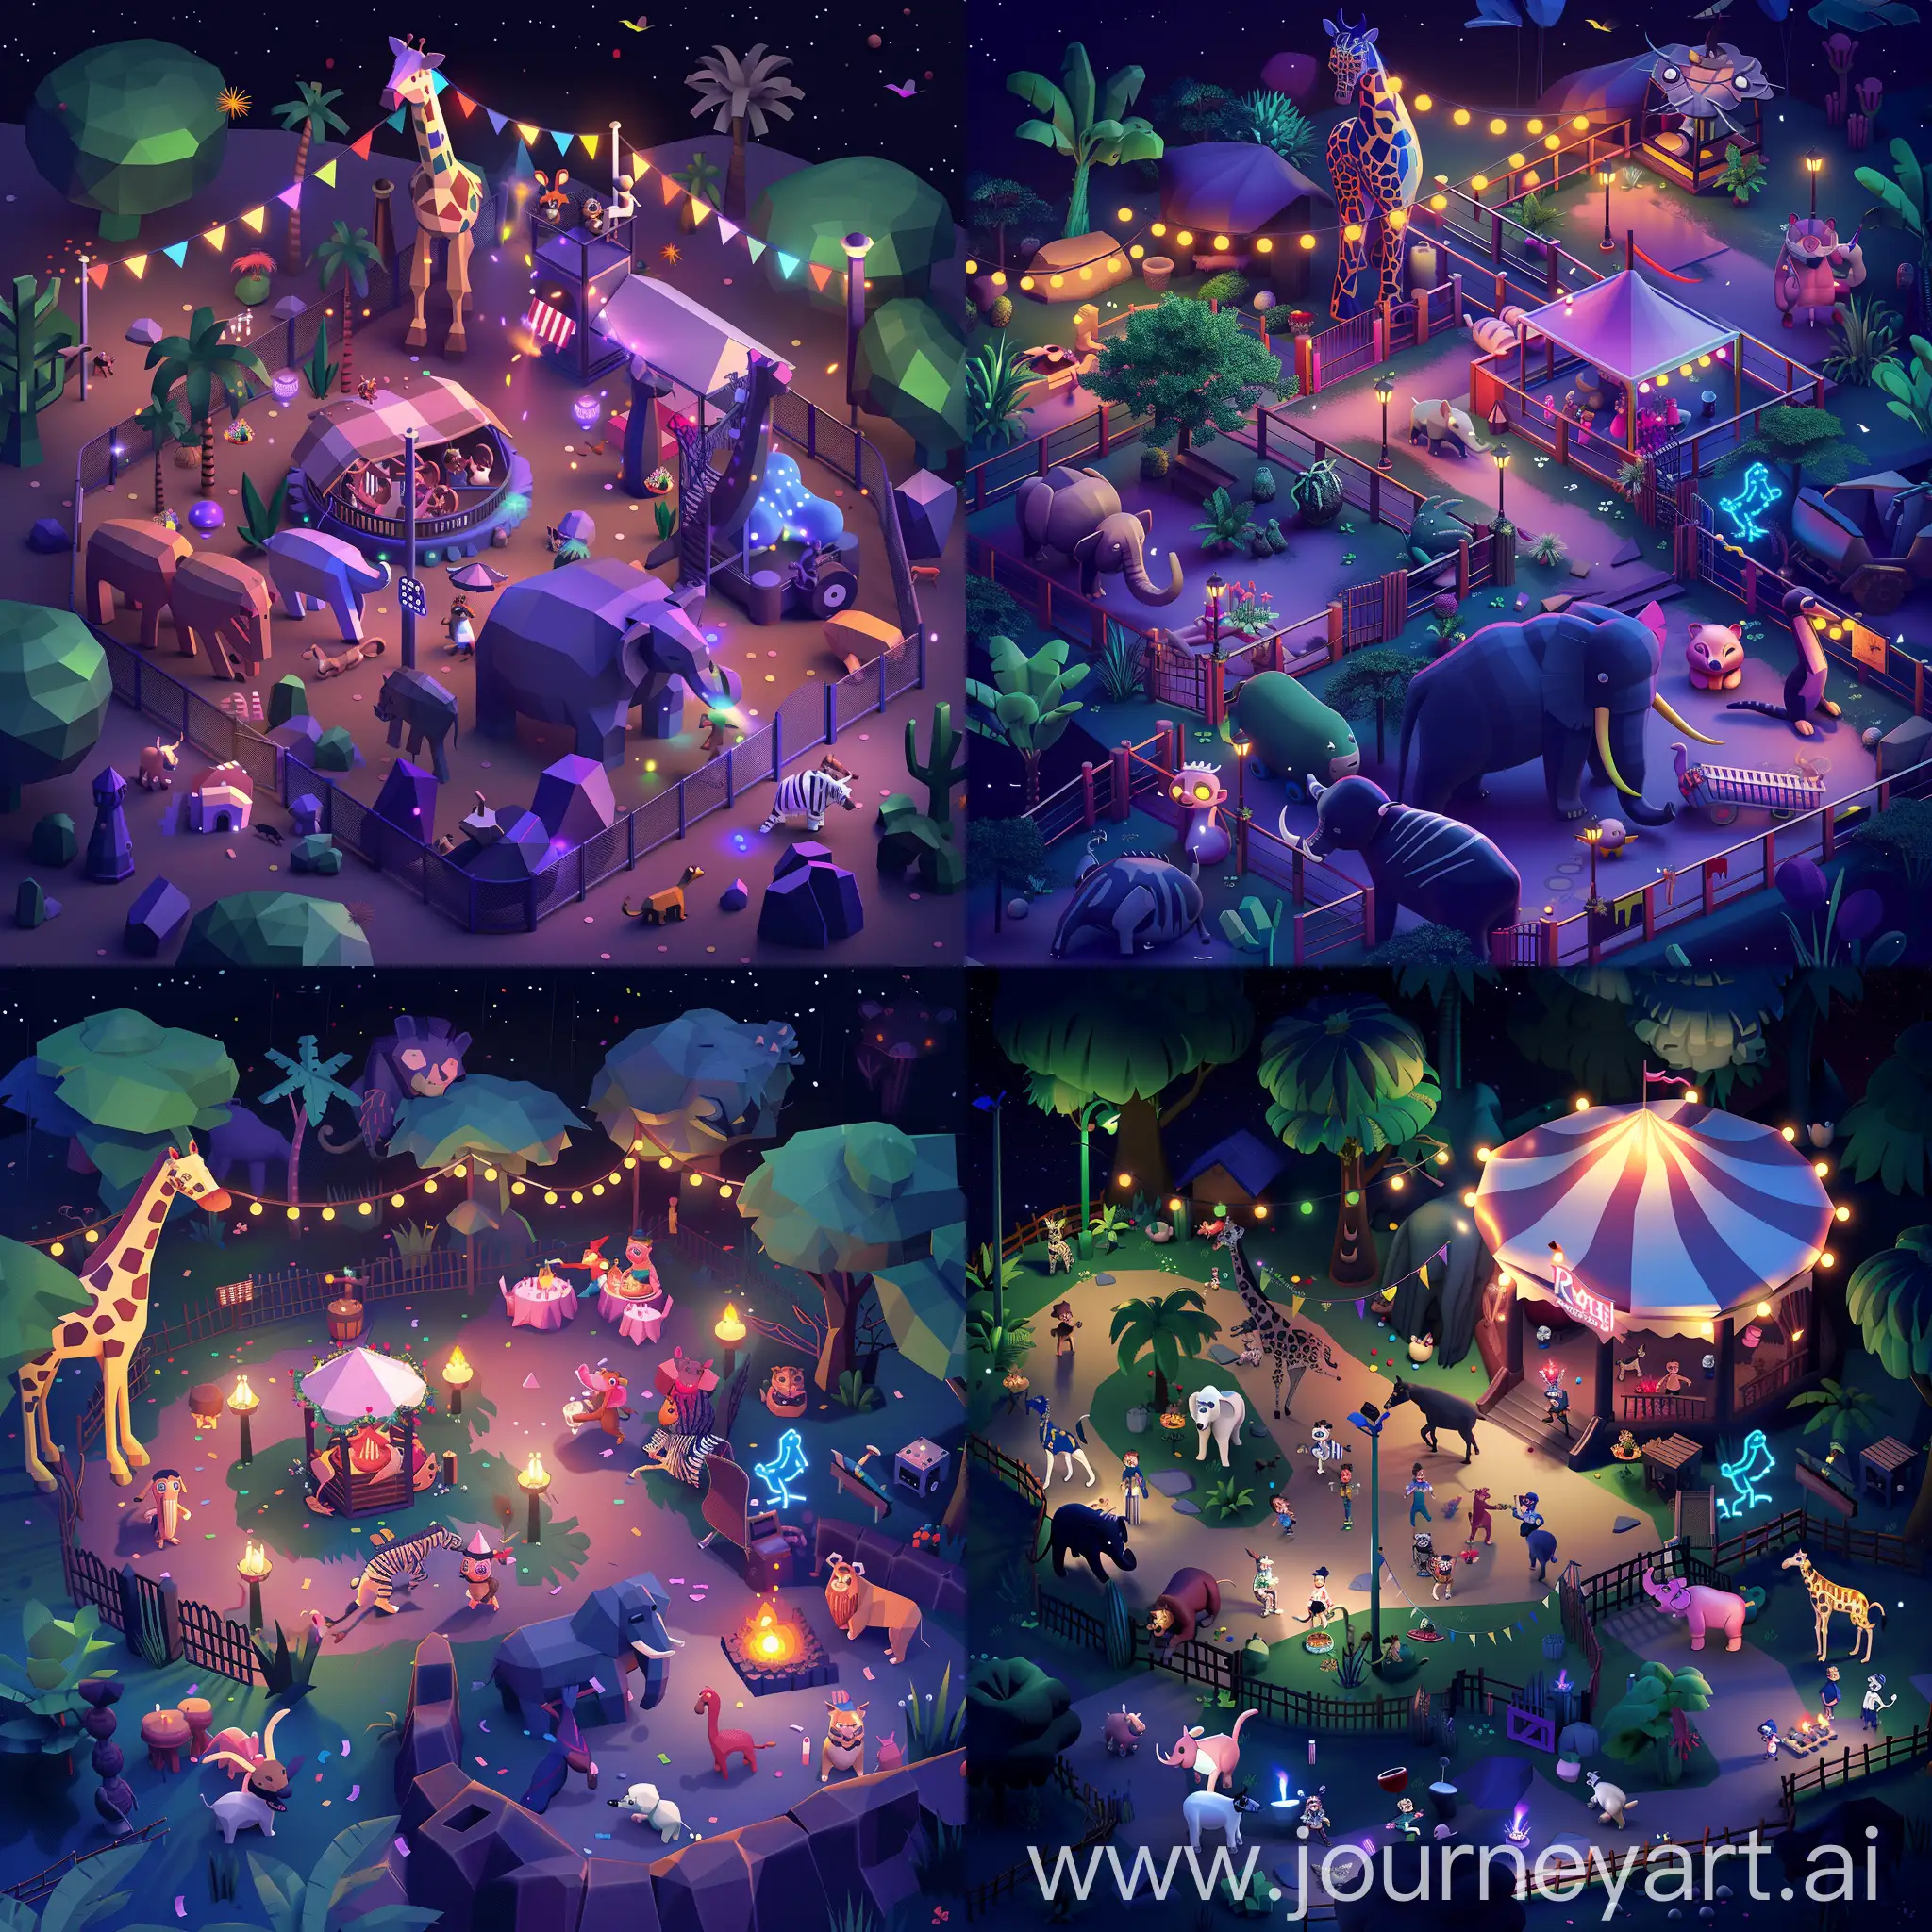 Create the image: An isometric, night time picture of animals in a zoo having the most raucous party you've ever seen. 4k